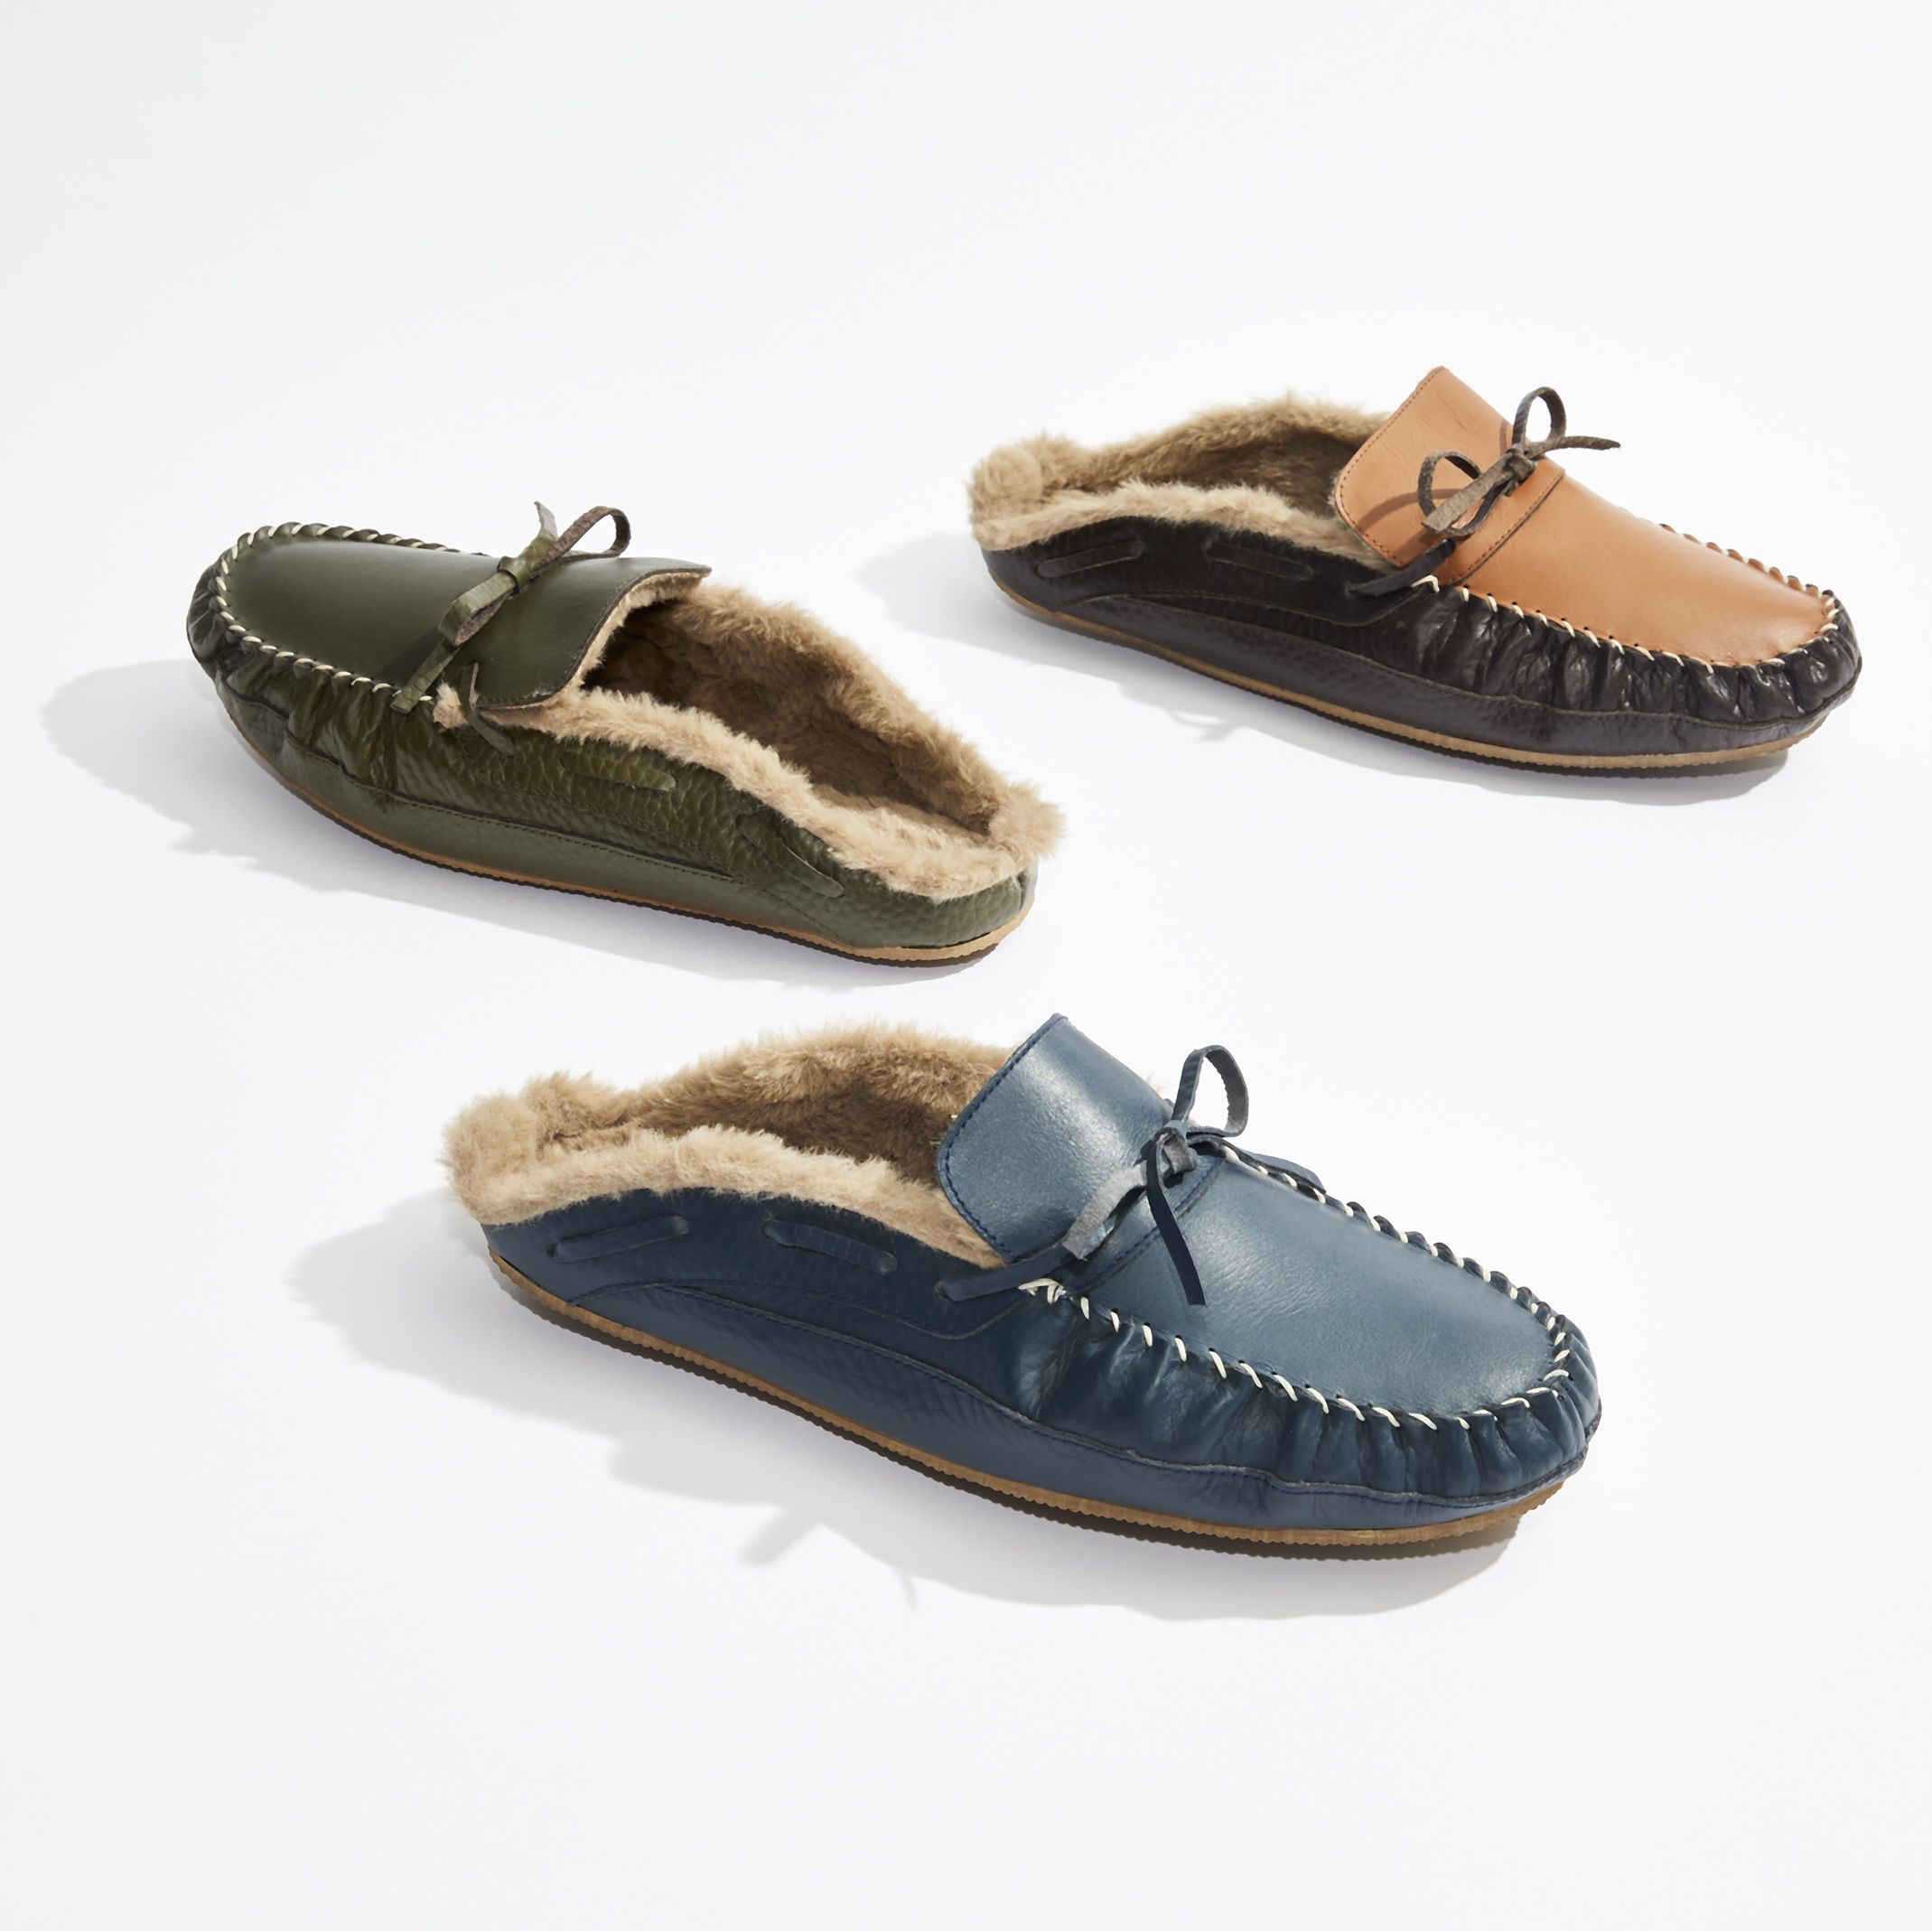 Line of Trade's Slippers Are Your Must-Have Cold-Weather Companions